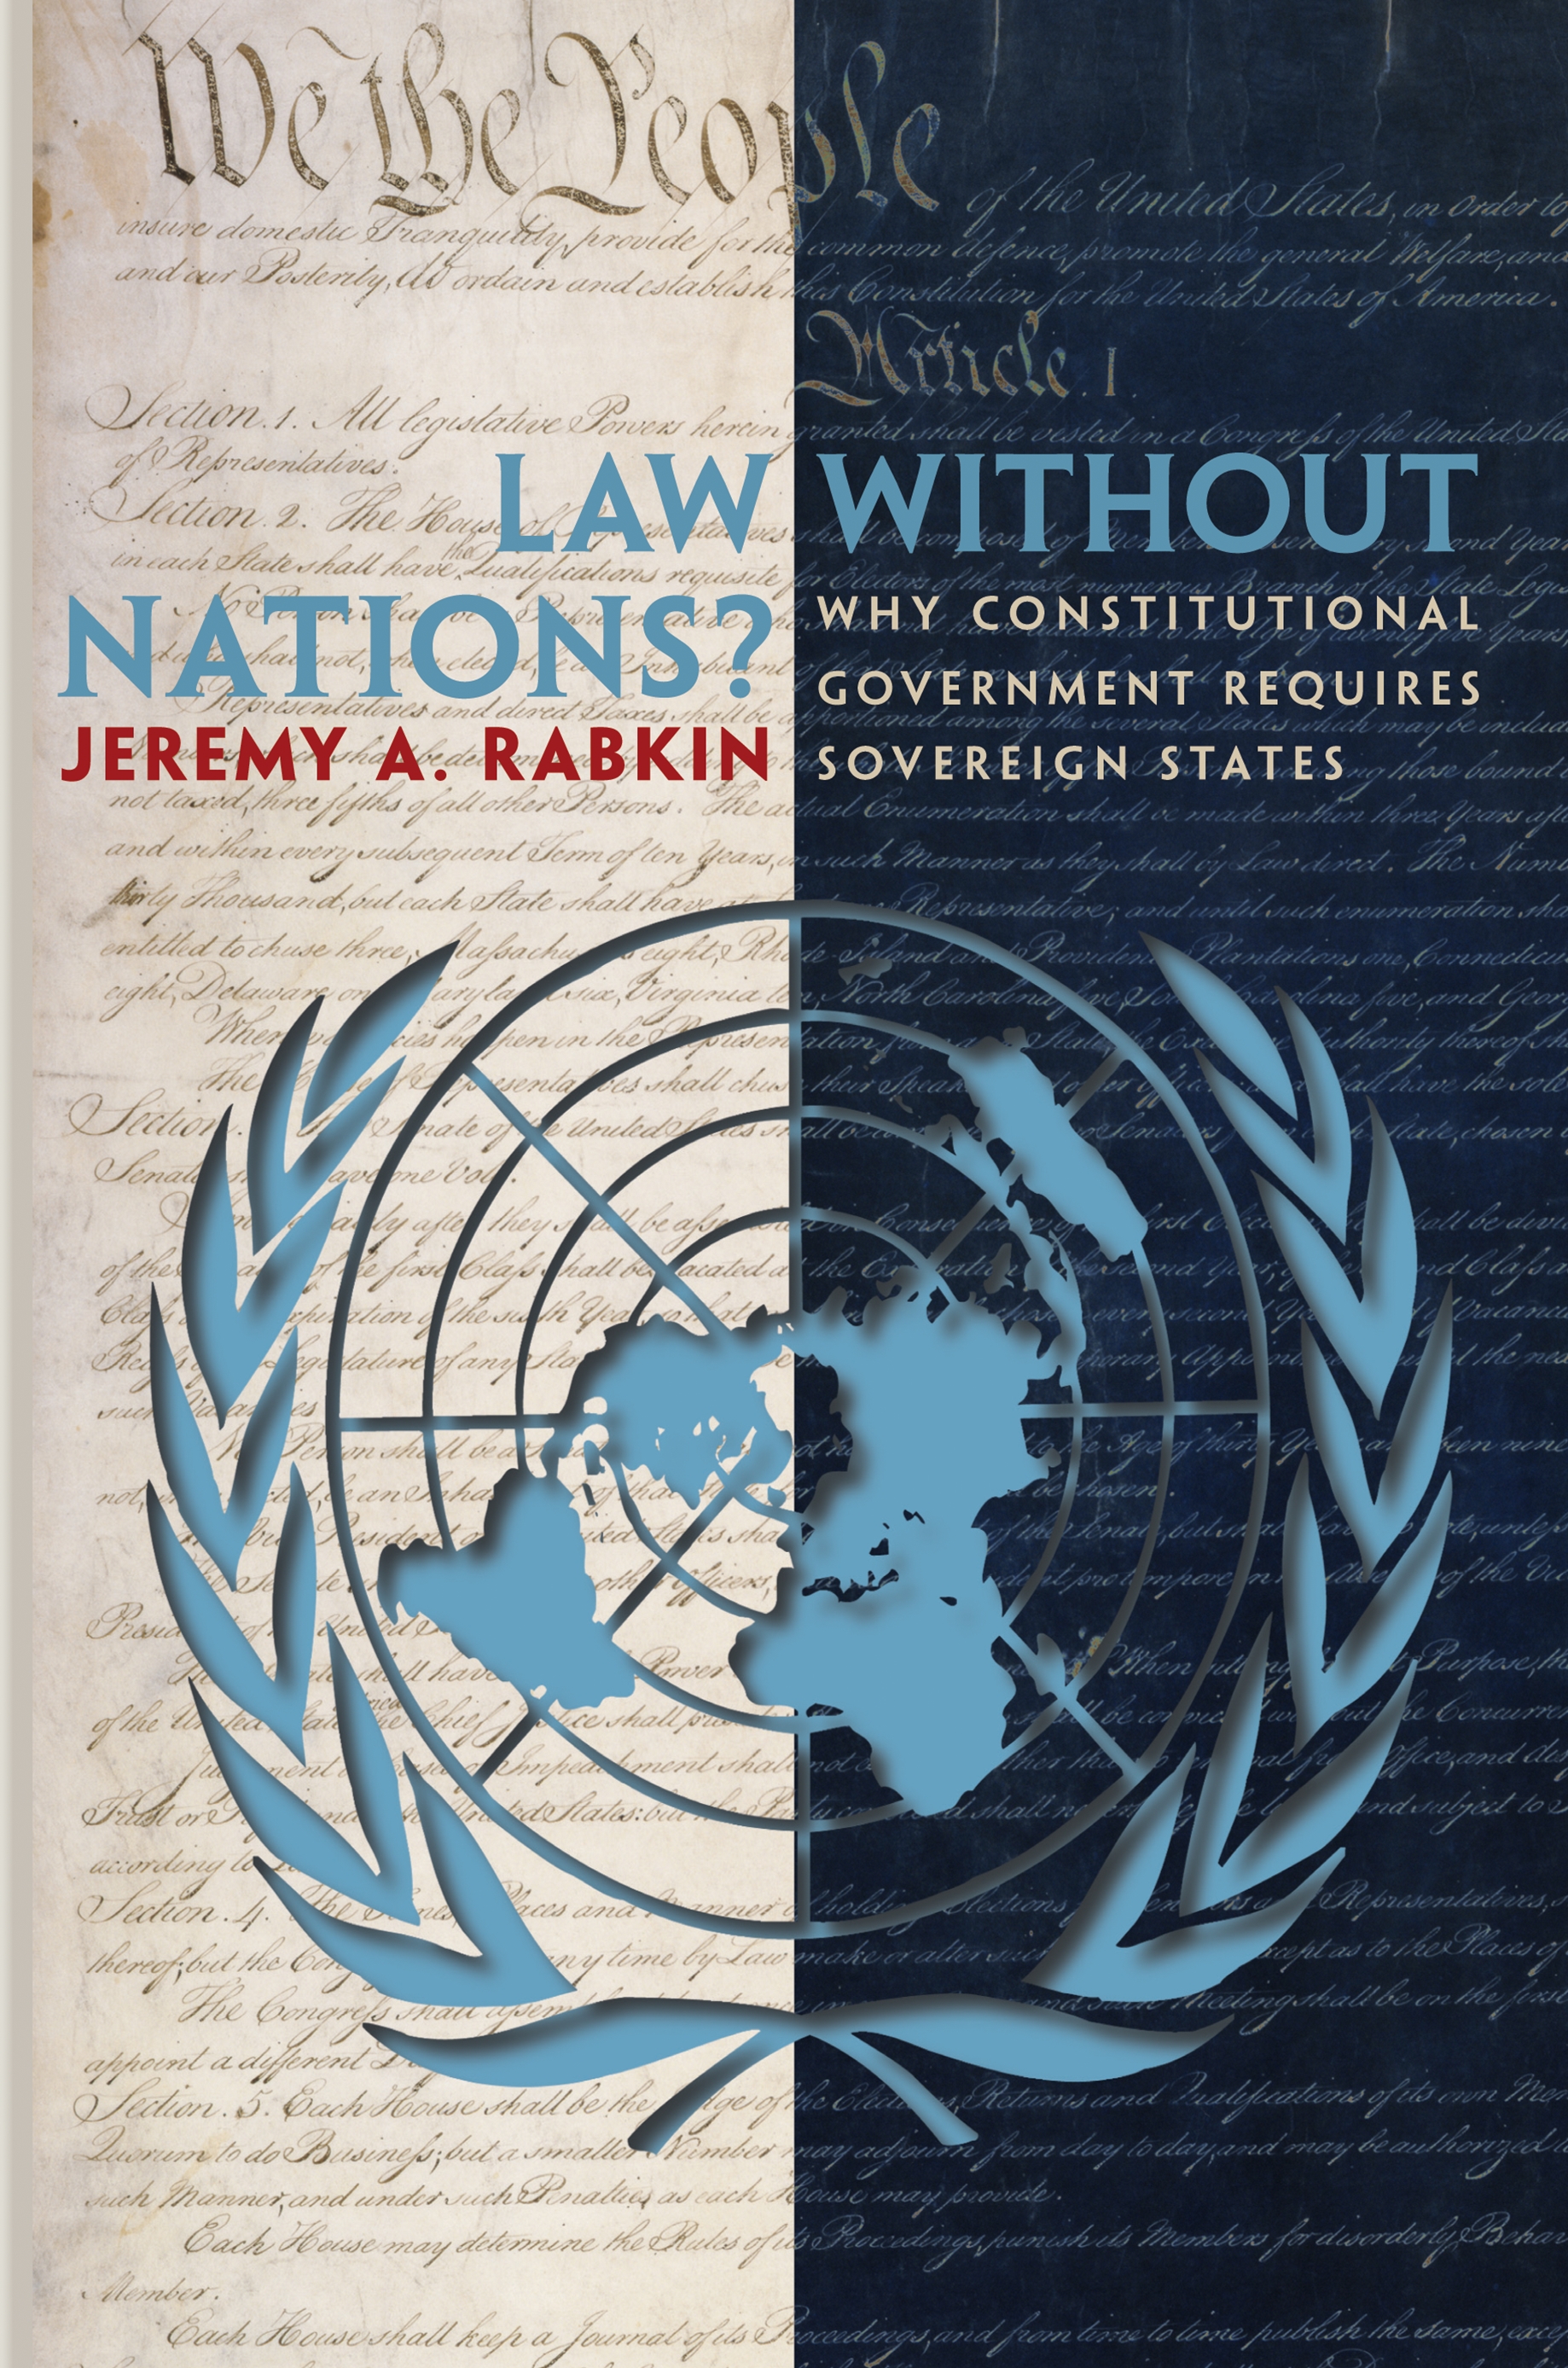 Nations without State. International Law.